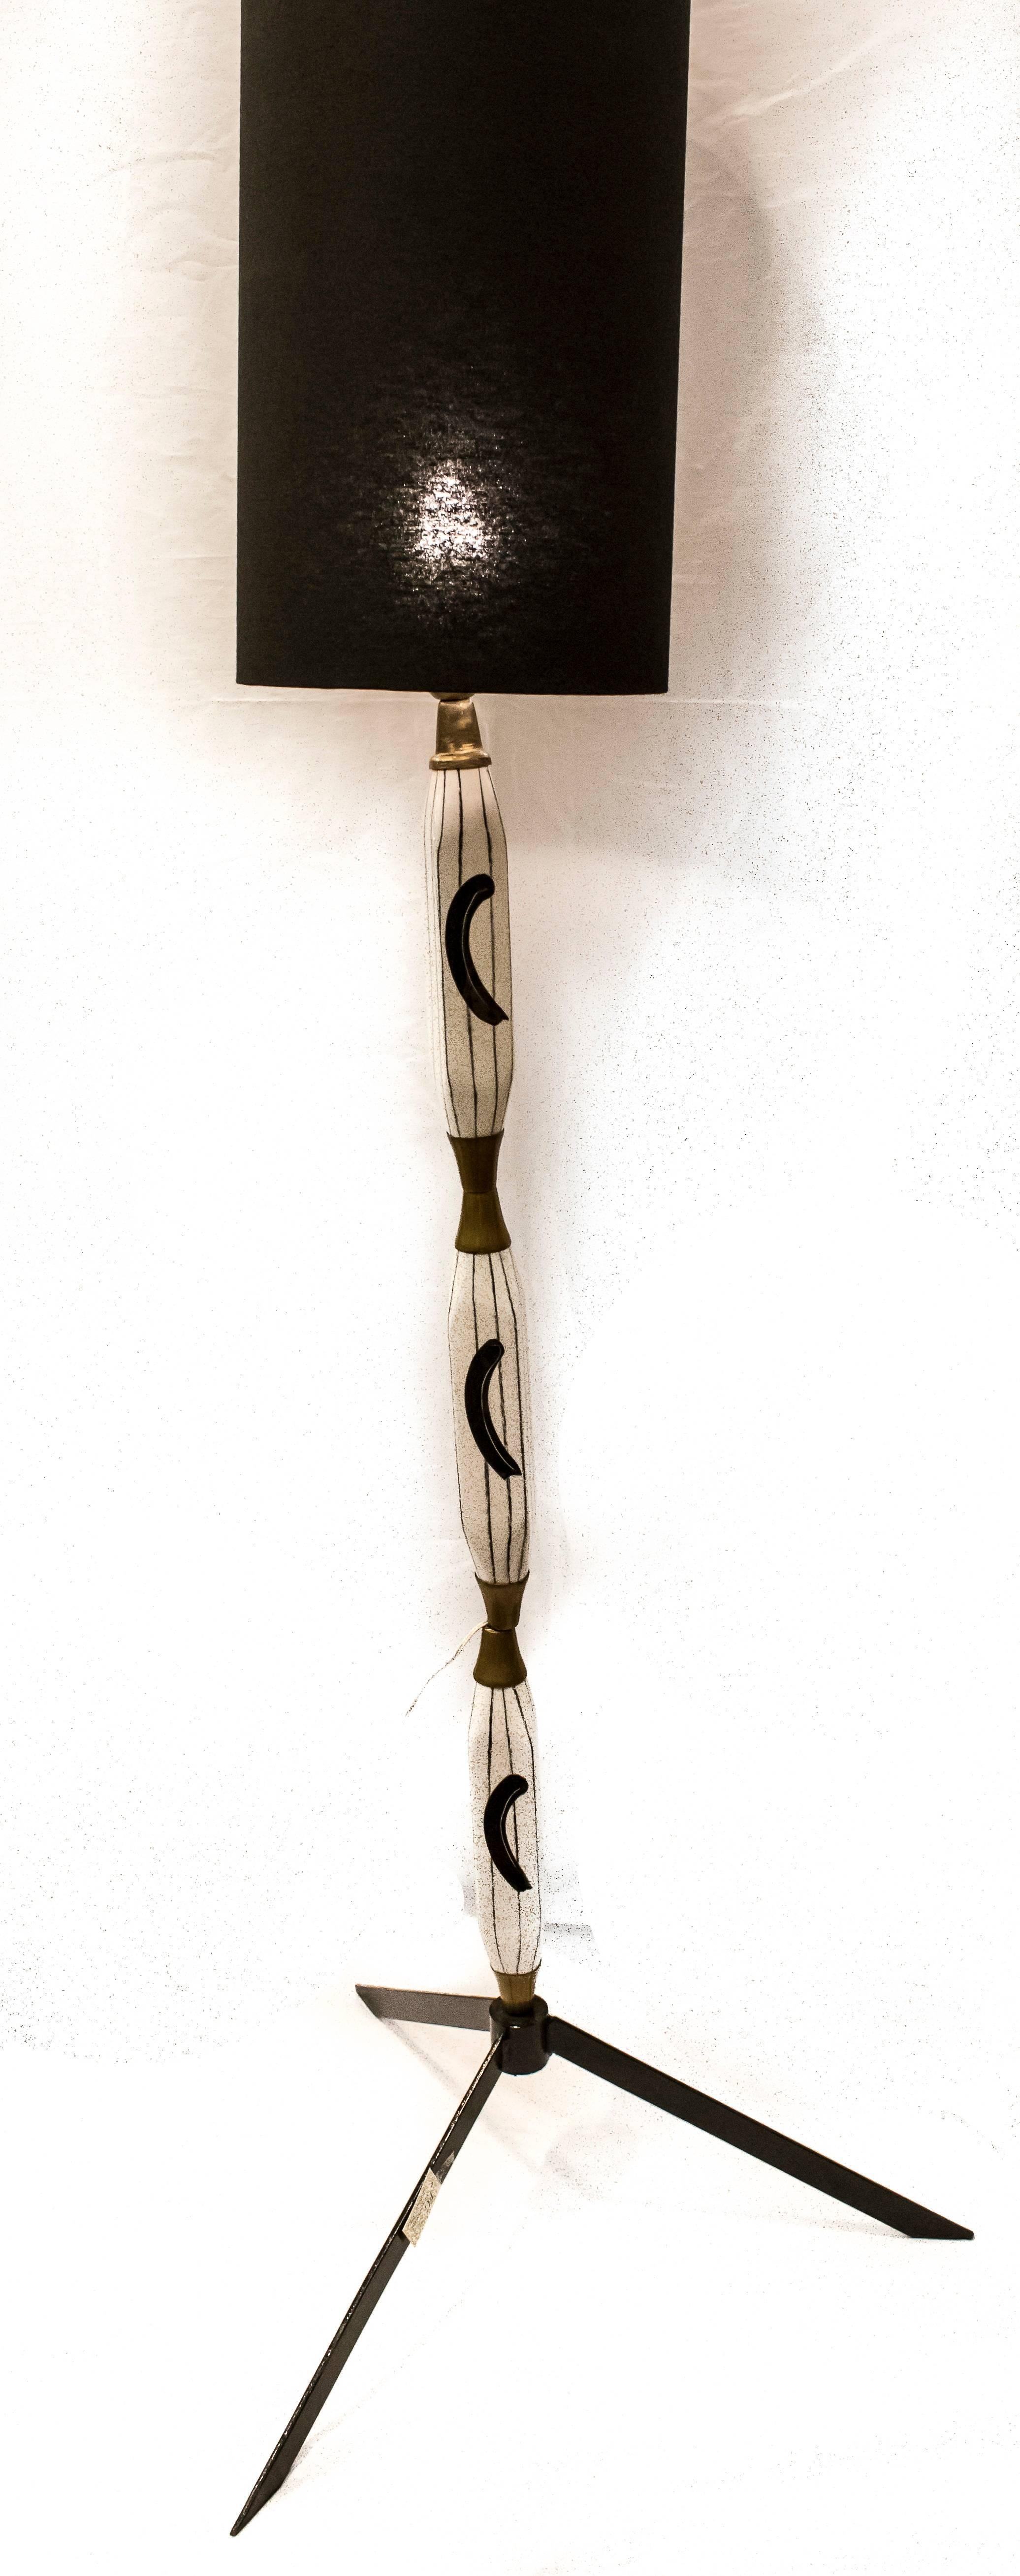 Beautiful floor lamp, by Aldo Tura (1909-1963) Milan (Italia). Painted ceramic with tribal motifs.
Black metal feet. In a very good condition. From a private collection in Milan.
     